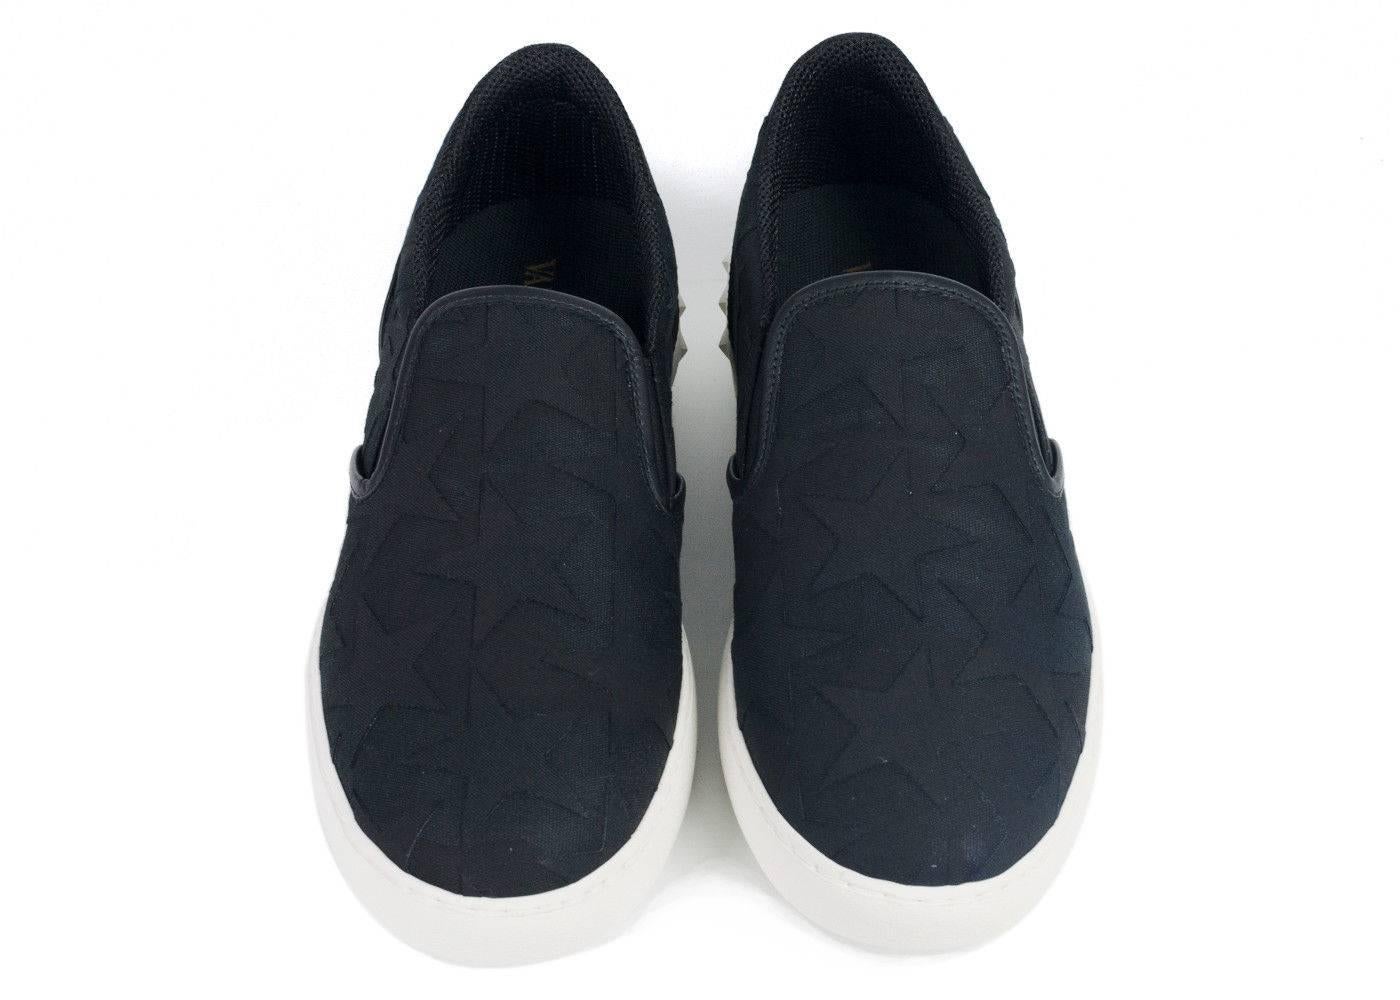 Brand New Valentino Rockstud Slip On Sneakers
Original Tags and Dust Bag Included
Retails in Stores & Online for $845
Men's Size EU 39/US 6 Fits true to size


The Valentino Rockstud sneakers are the ideal slip-ons. These canvas sneakers feature